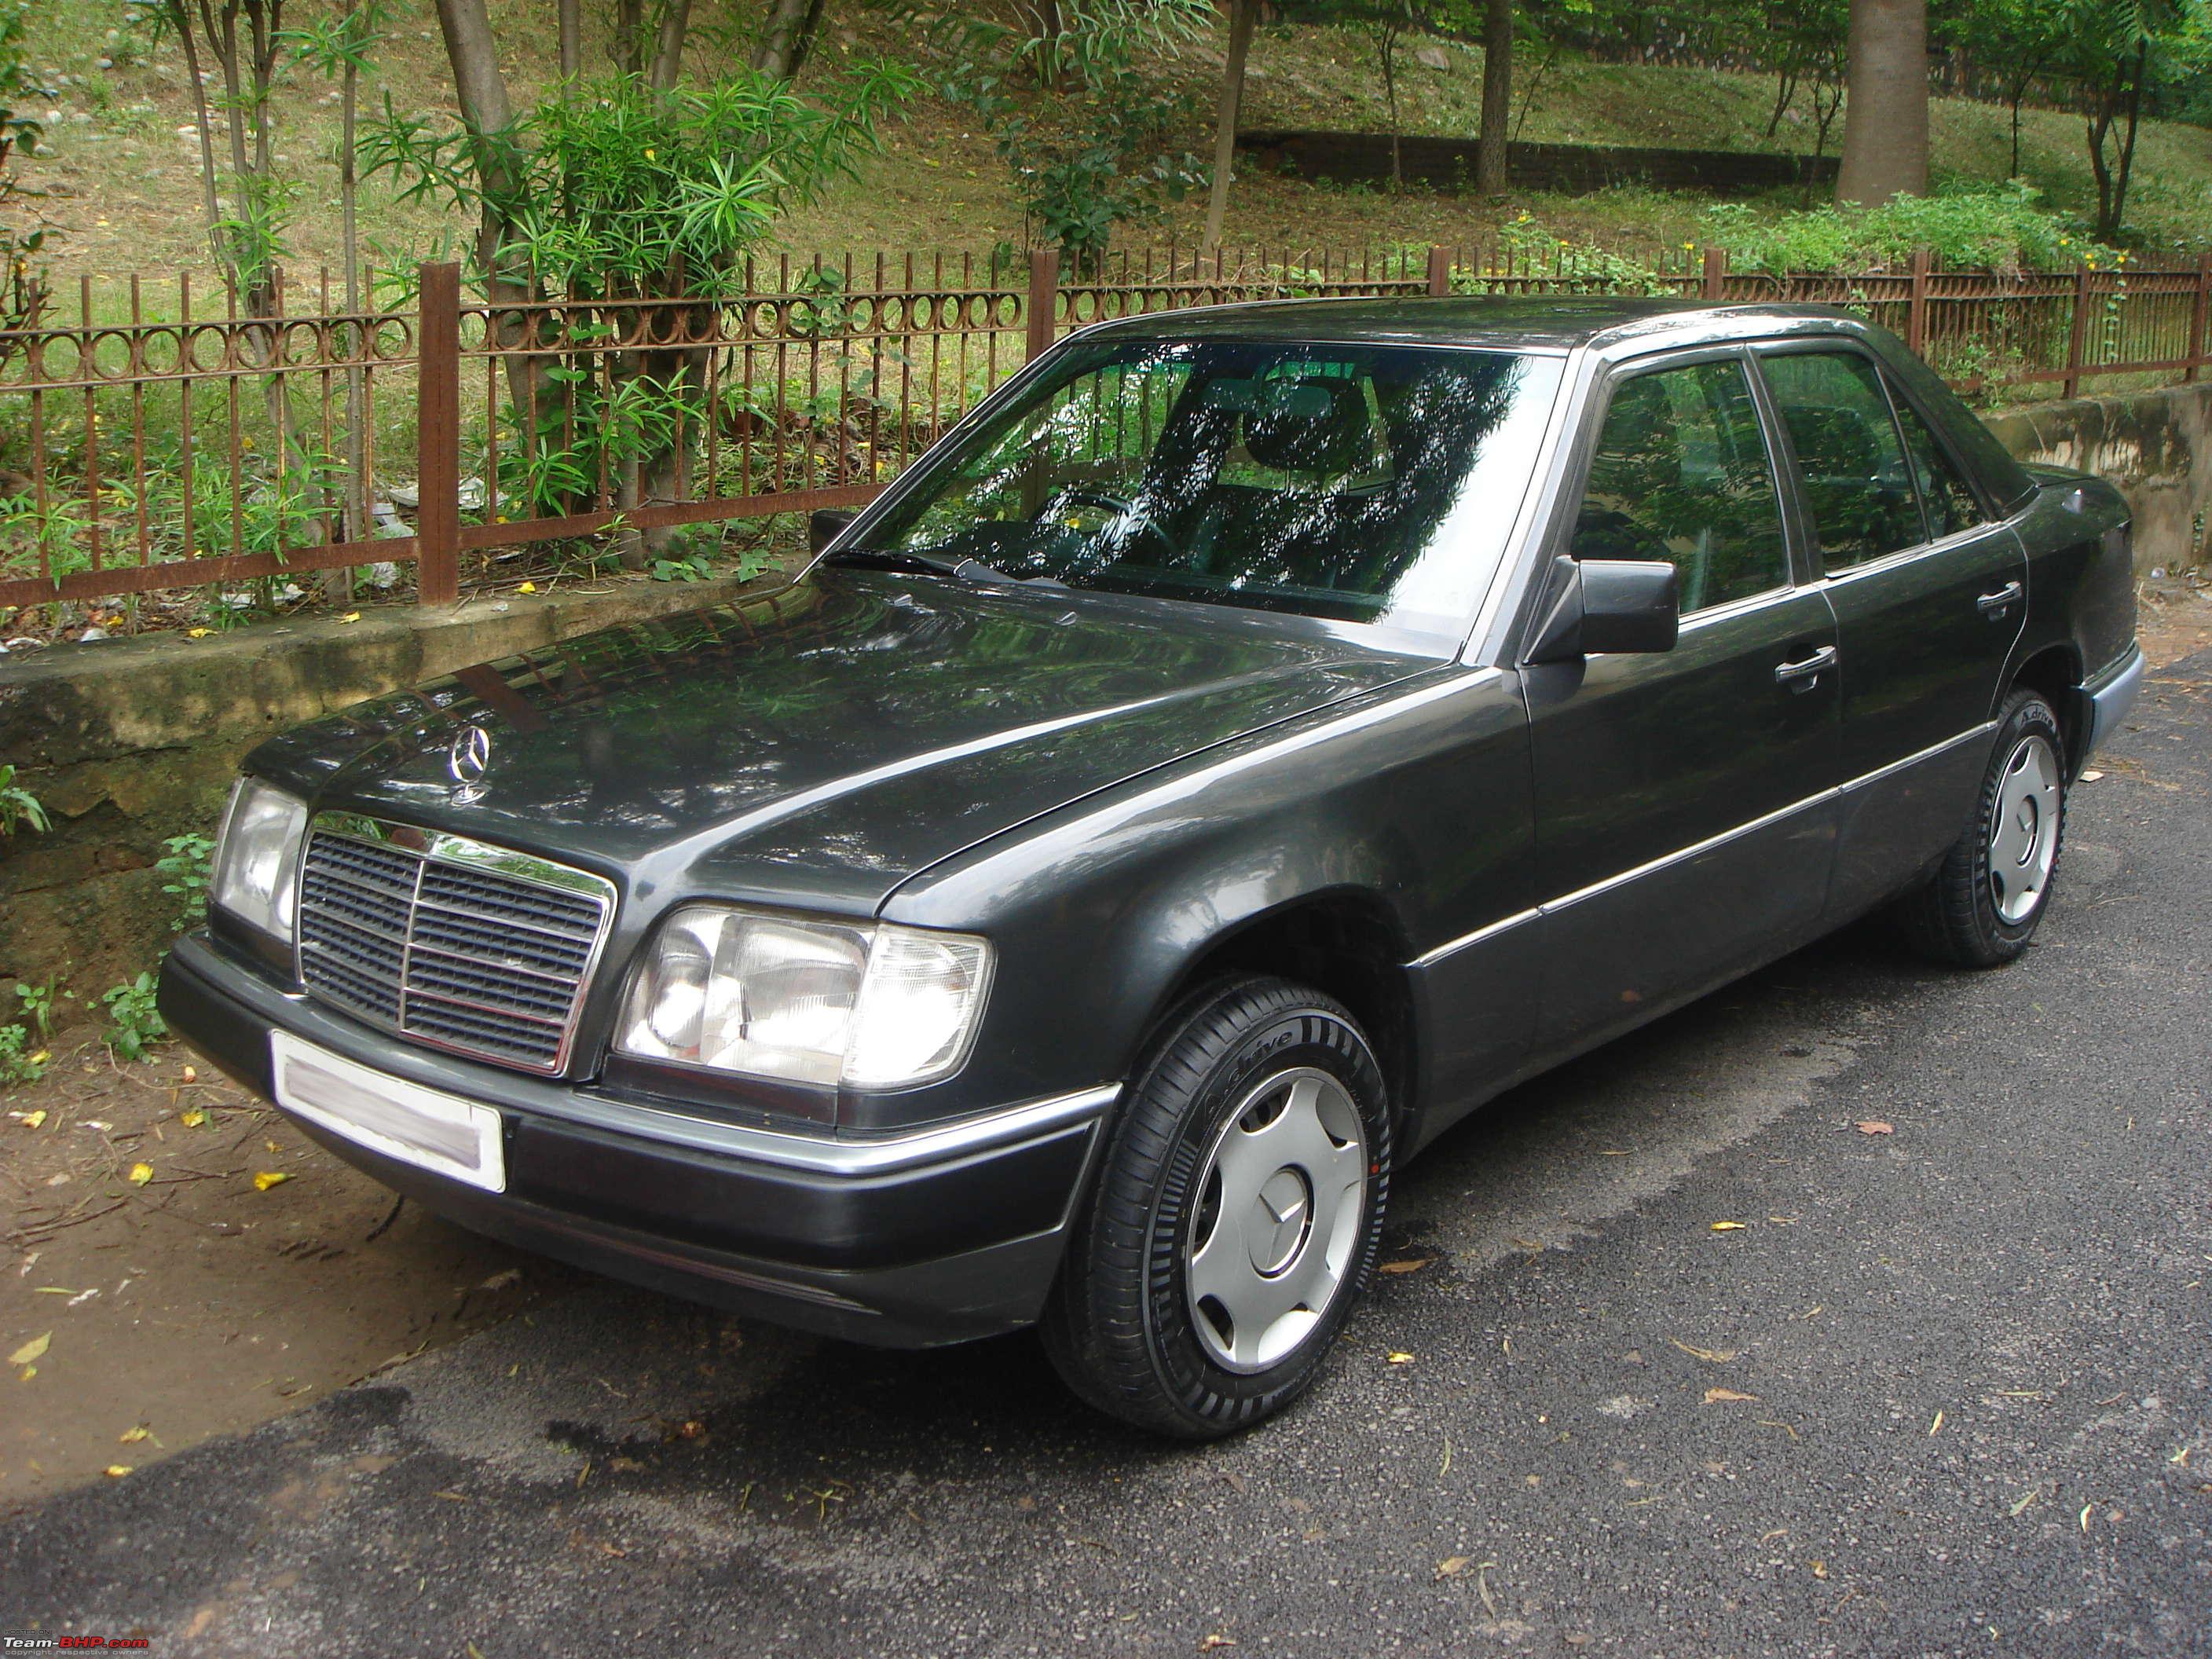 W124 - Mercedes E220 or E250D? Which would you buy? - Page 7 - Team-BHP